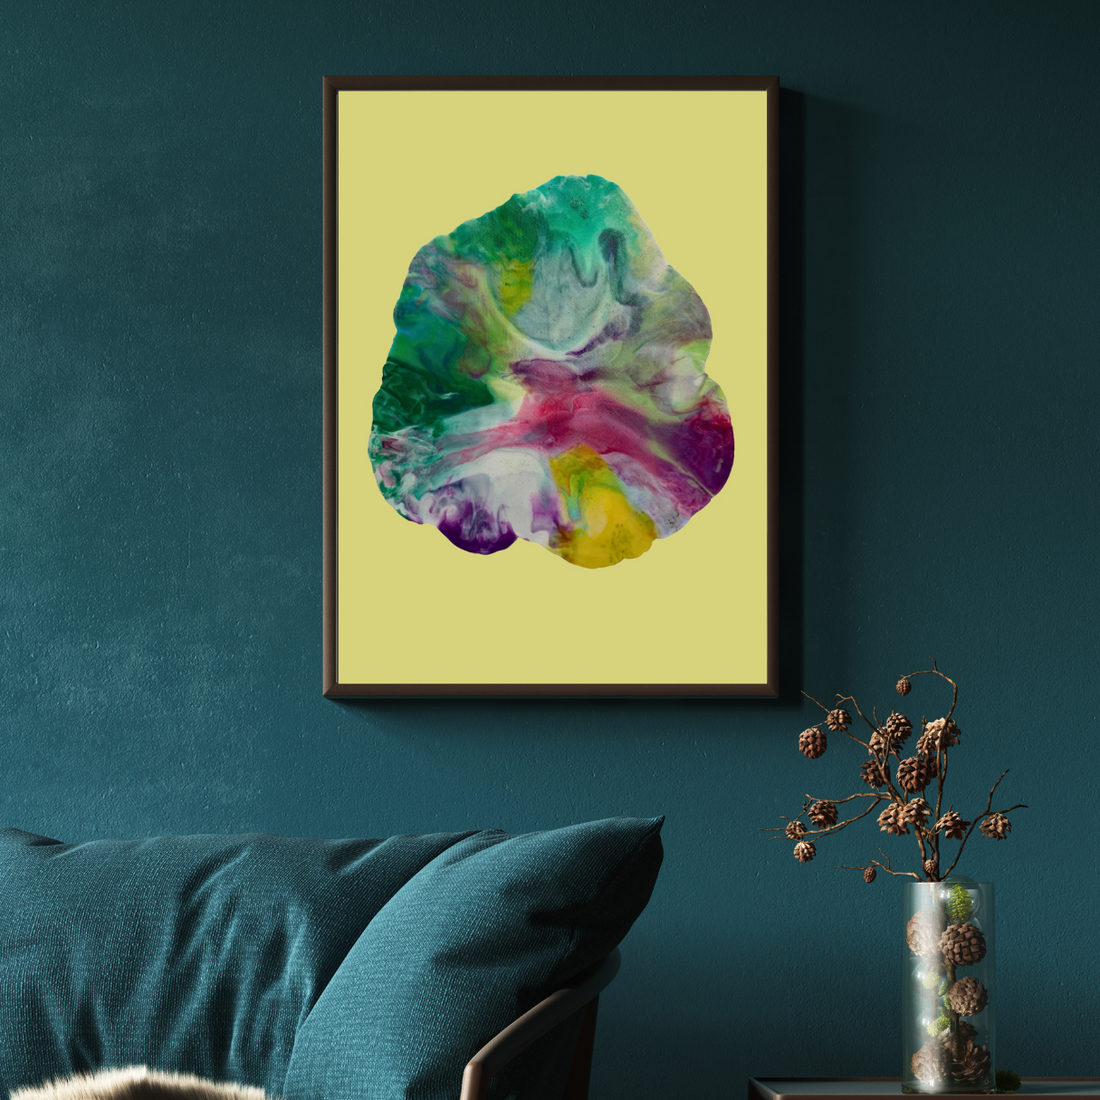 Printable Art - Eco-friendly and cost-effective way to transform your home